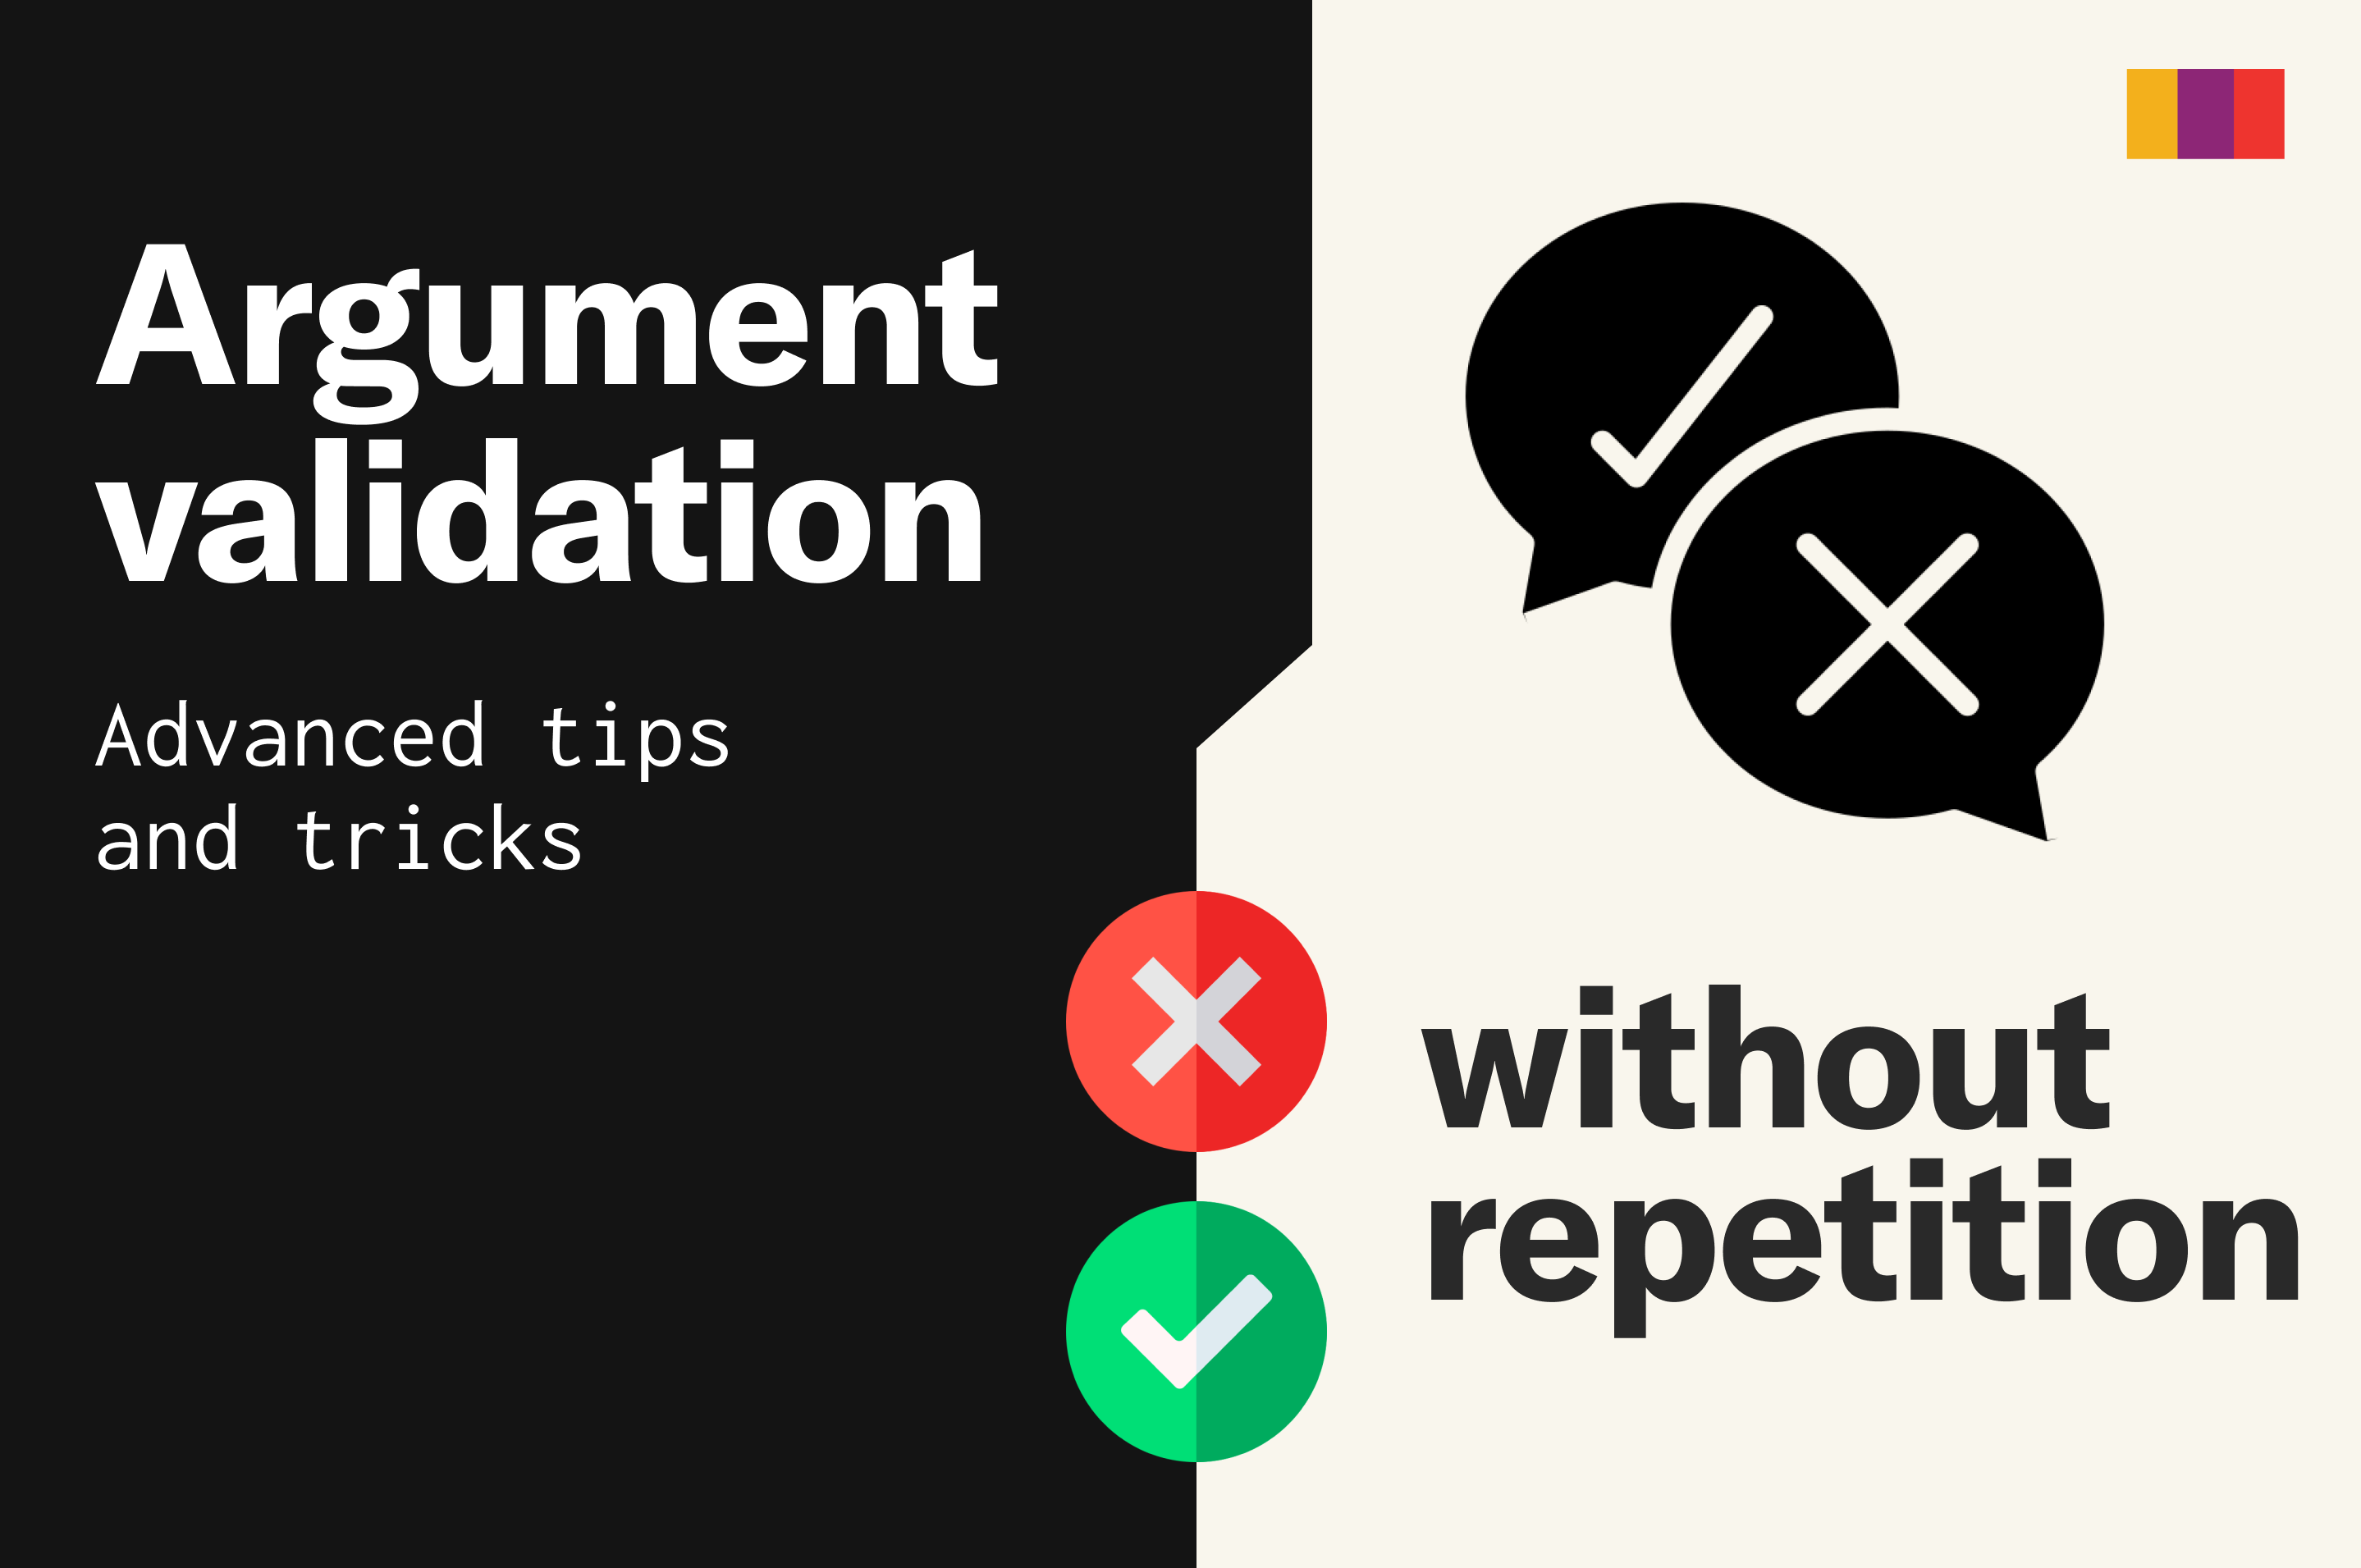 Argument validation without repetition: Advanced tips and tricks